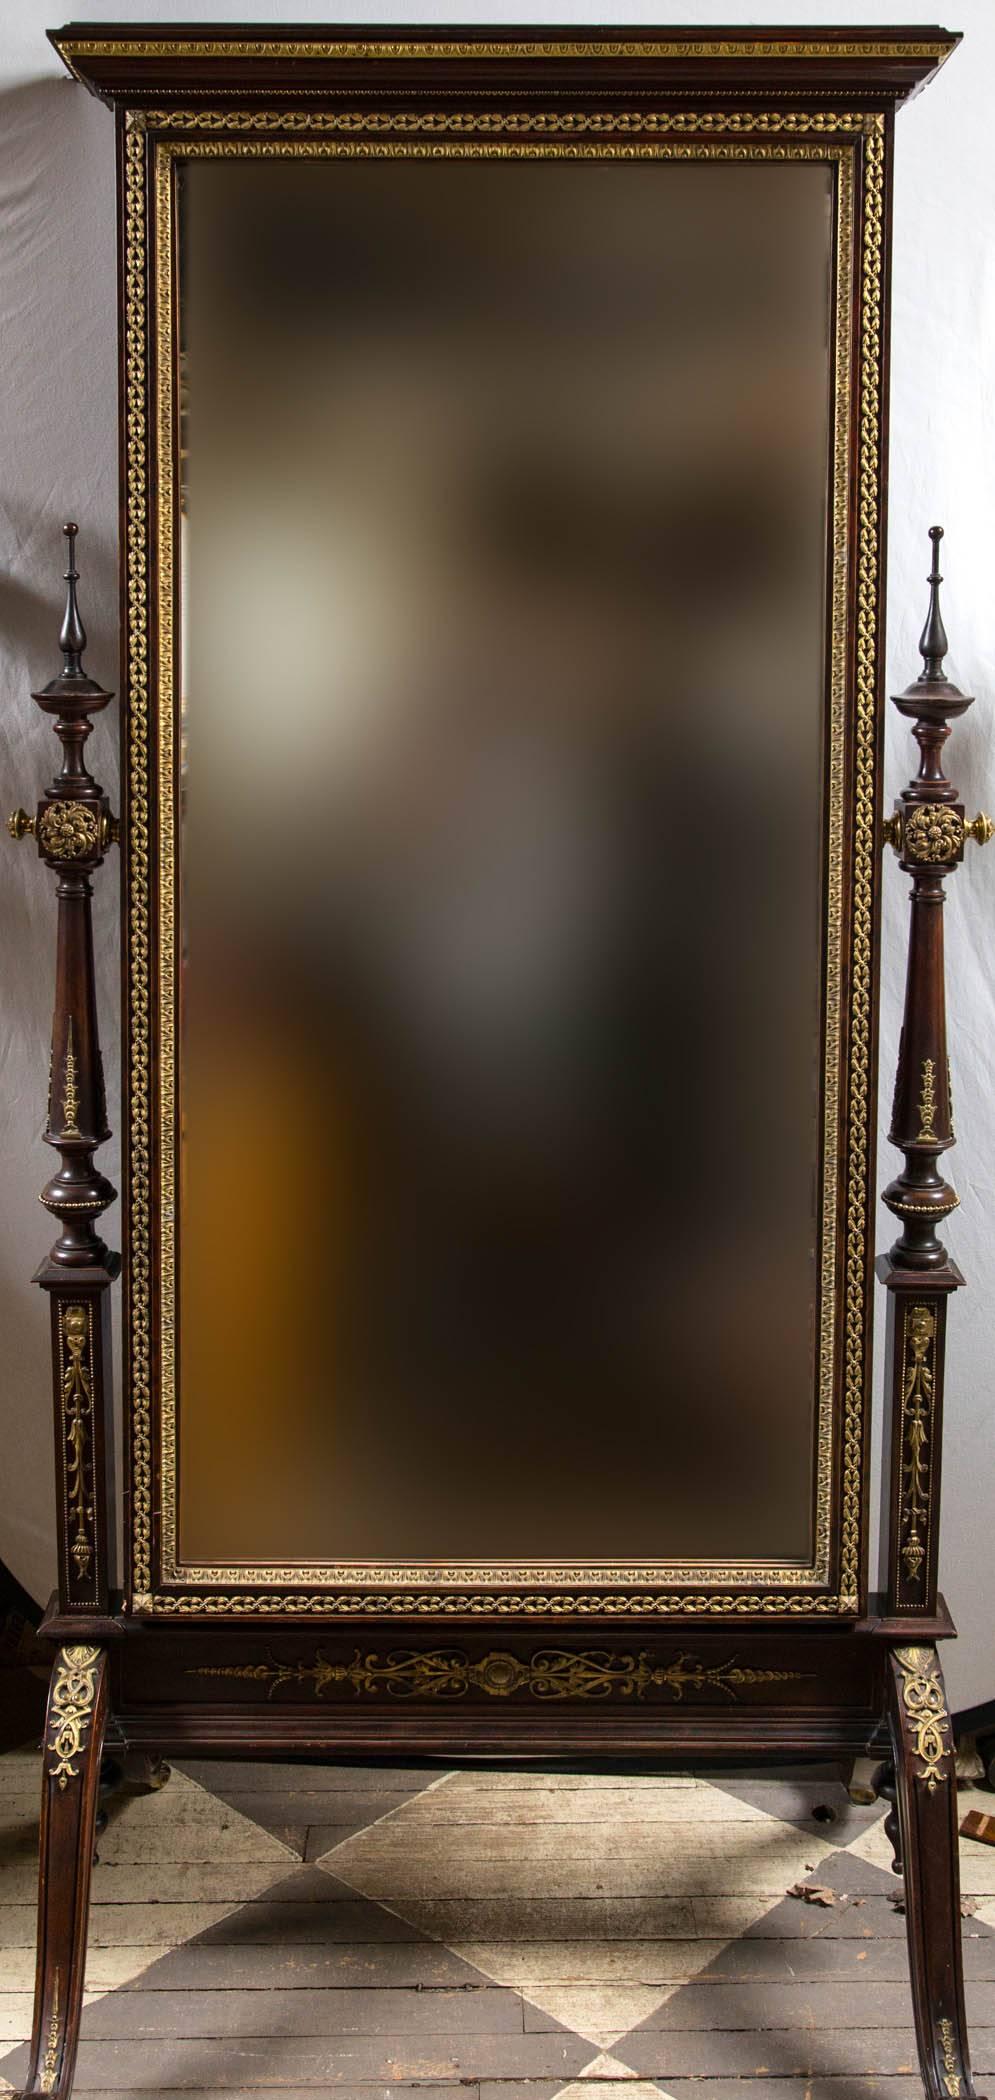 Gilt bronze mounts add to the beauty of this neoclassic style cheval mirror
the glass is bevelled. The mahogany decorated with gilt bronze mounts of fine quality. Scrolling toes, delicate finials on the uprights. On casters.